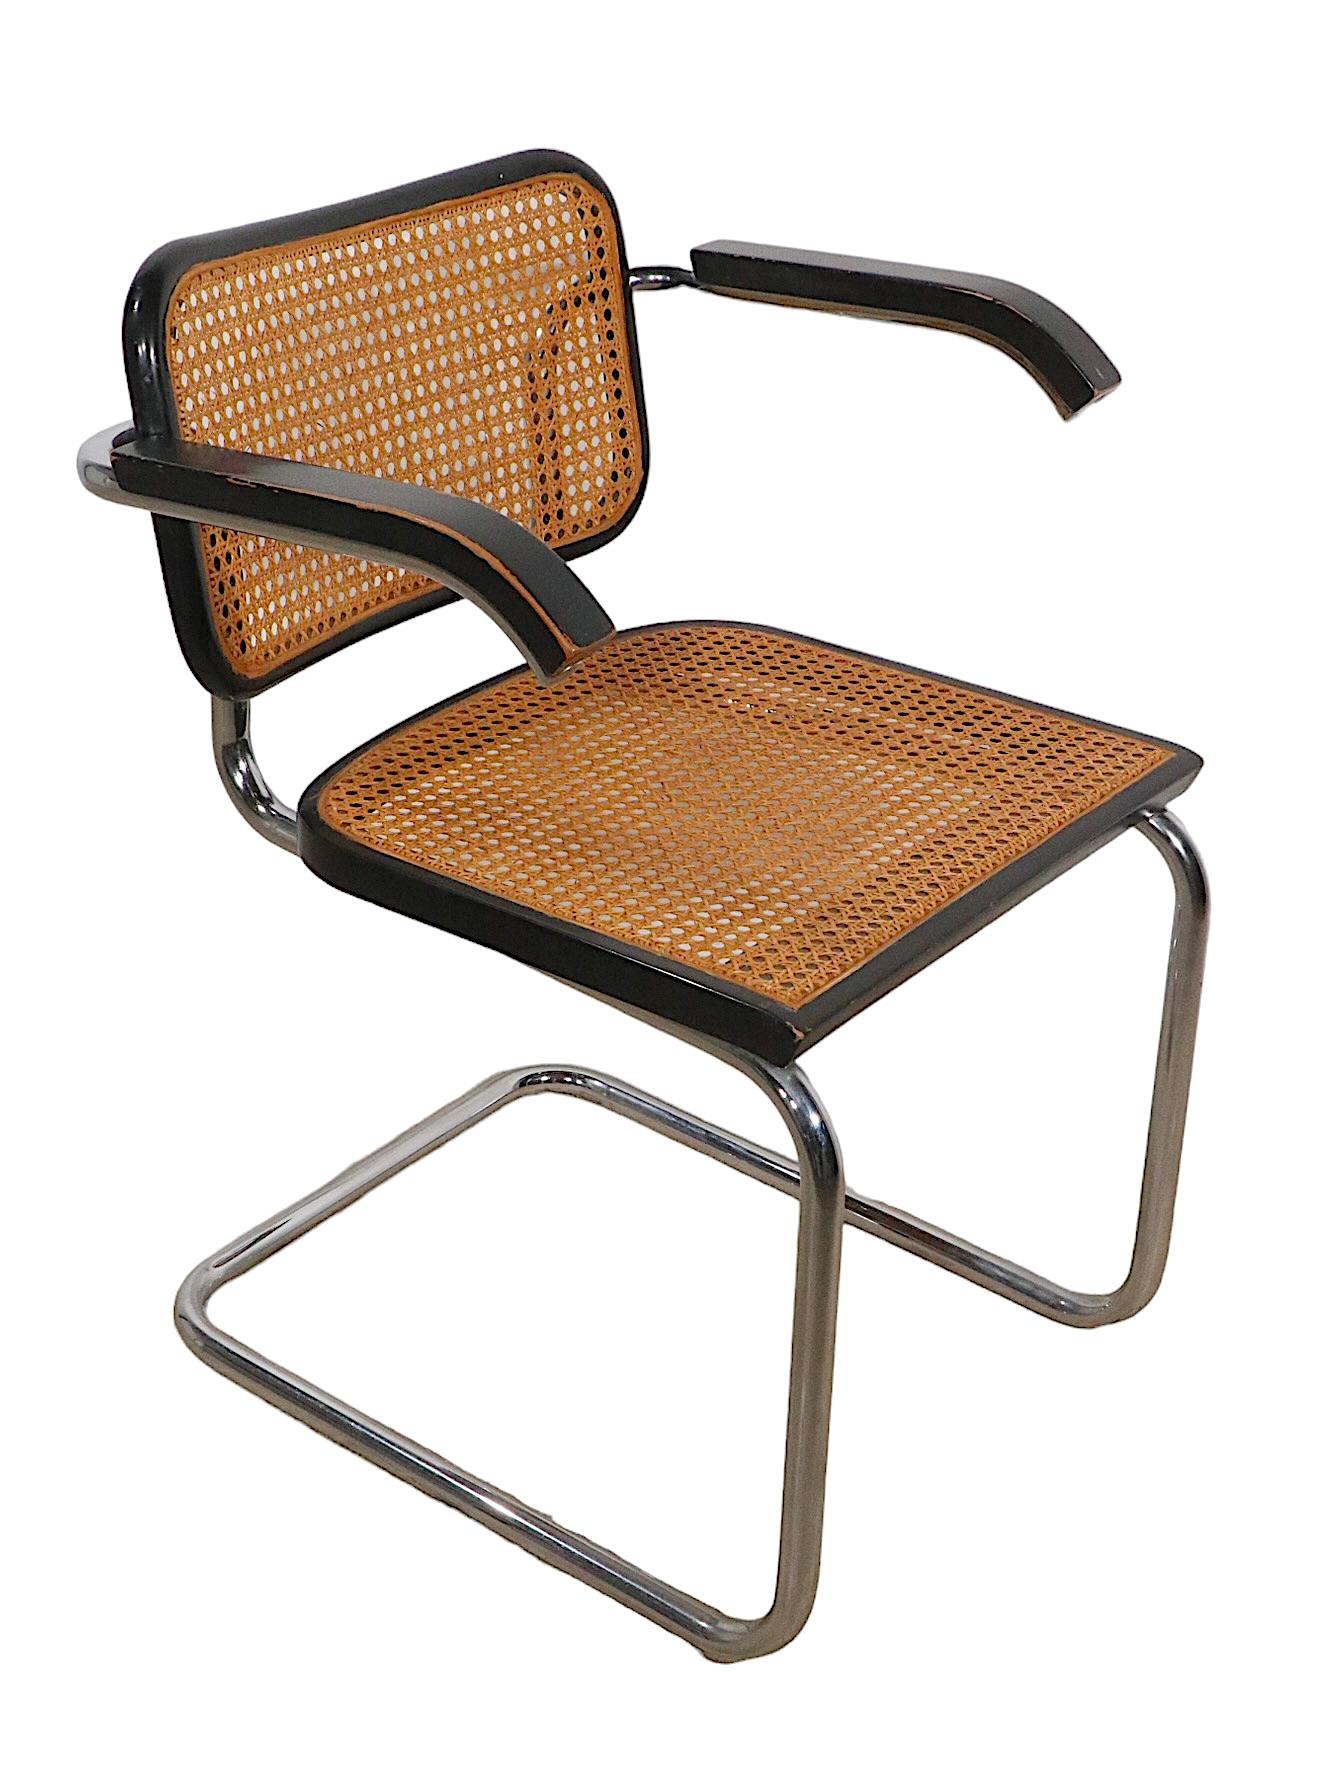 Chrome and Black Cesca Chair Designed by Marcel Breuer Made in Italy circa 1970s For Sale 3